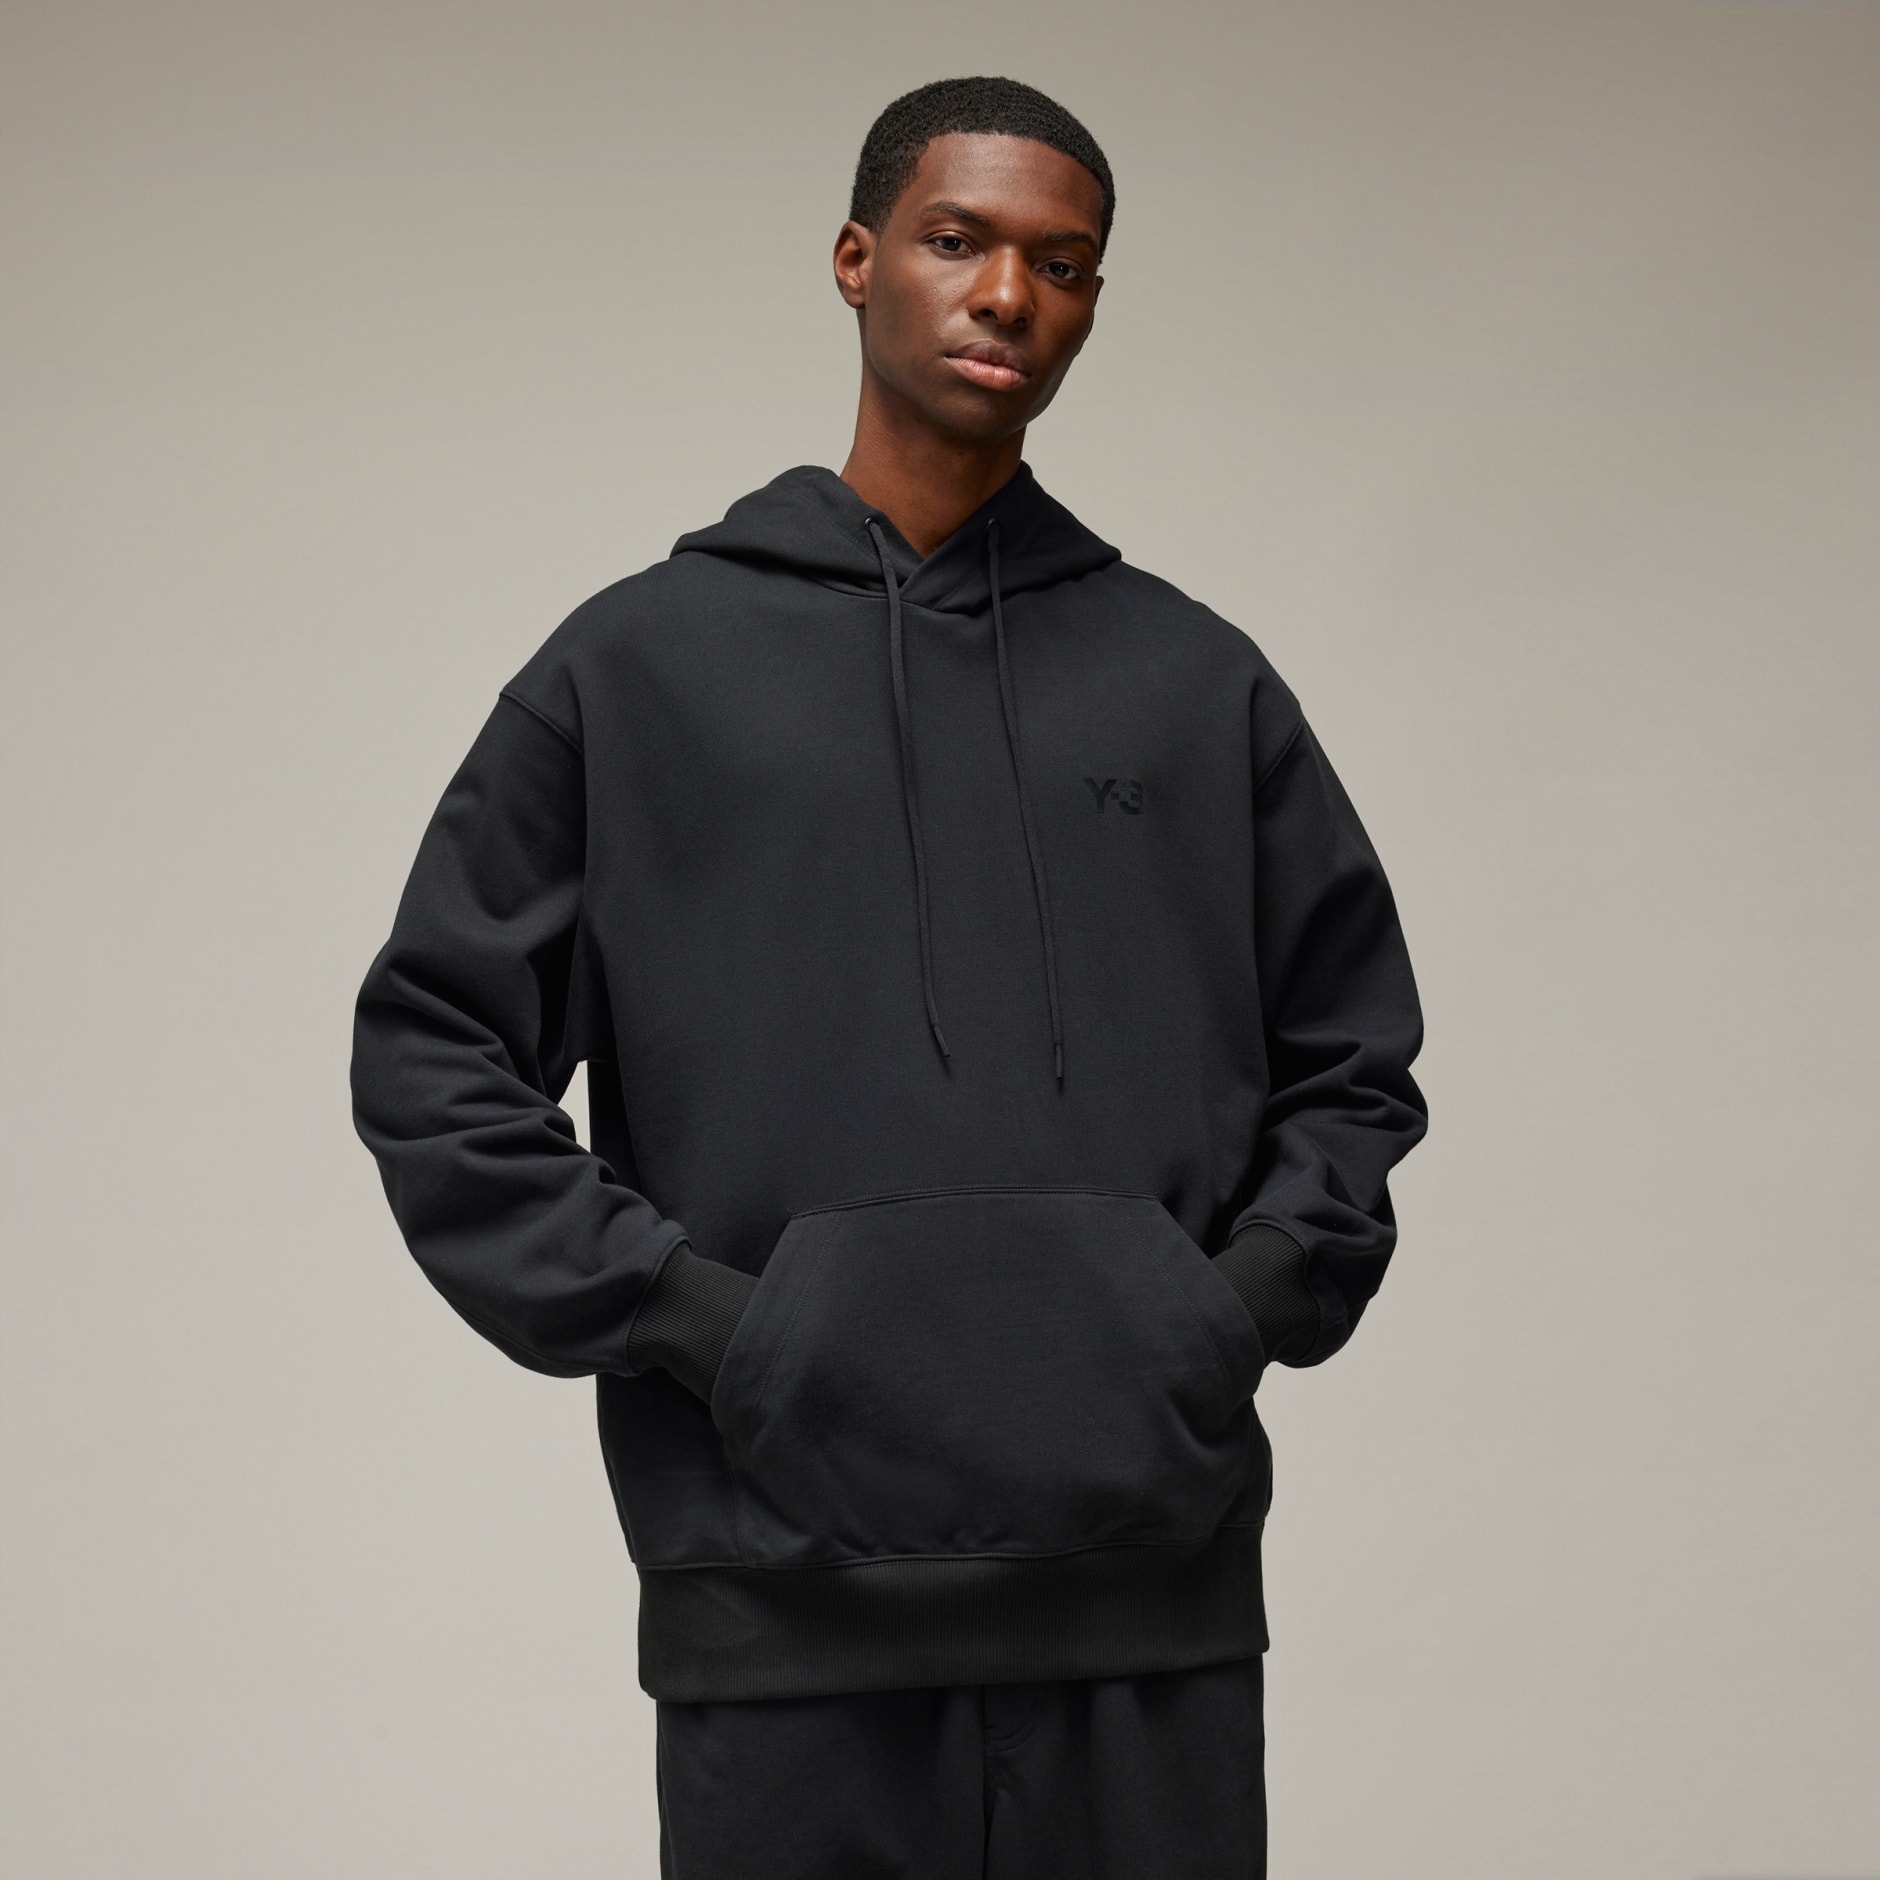 Clothing - Y-3 French Terry Hoodie - Black | adidas South Africa